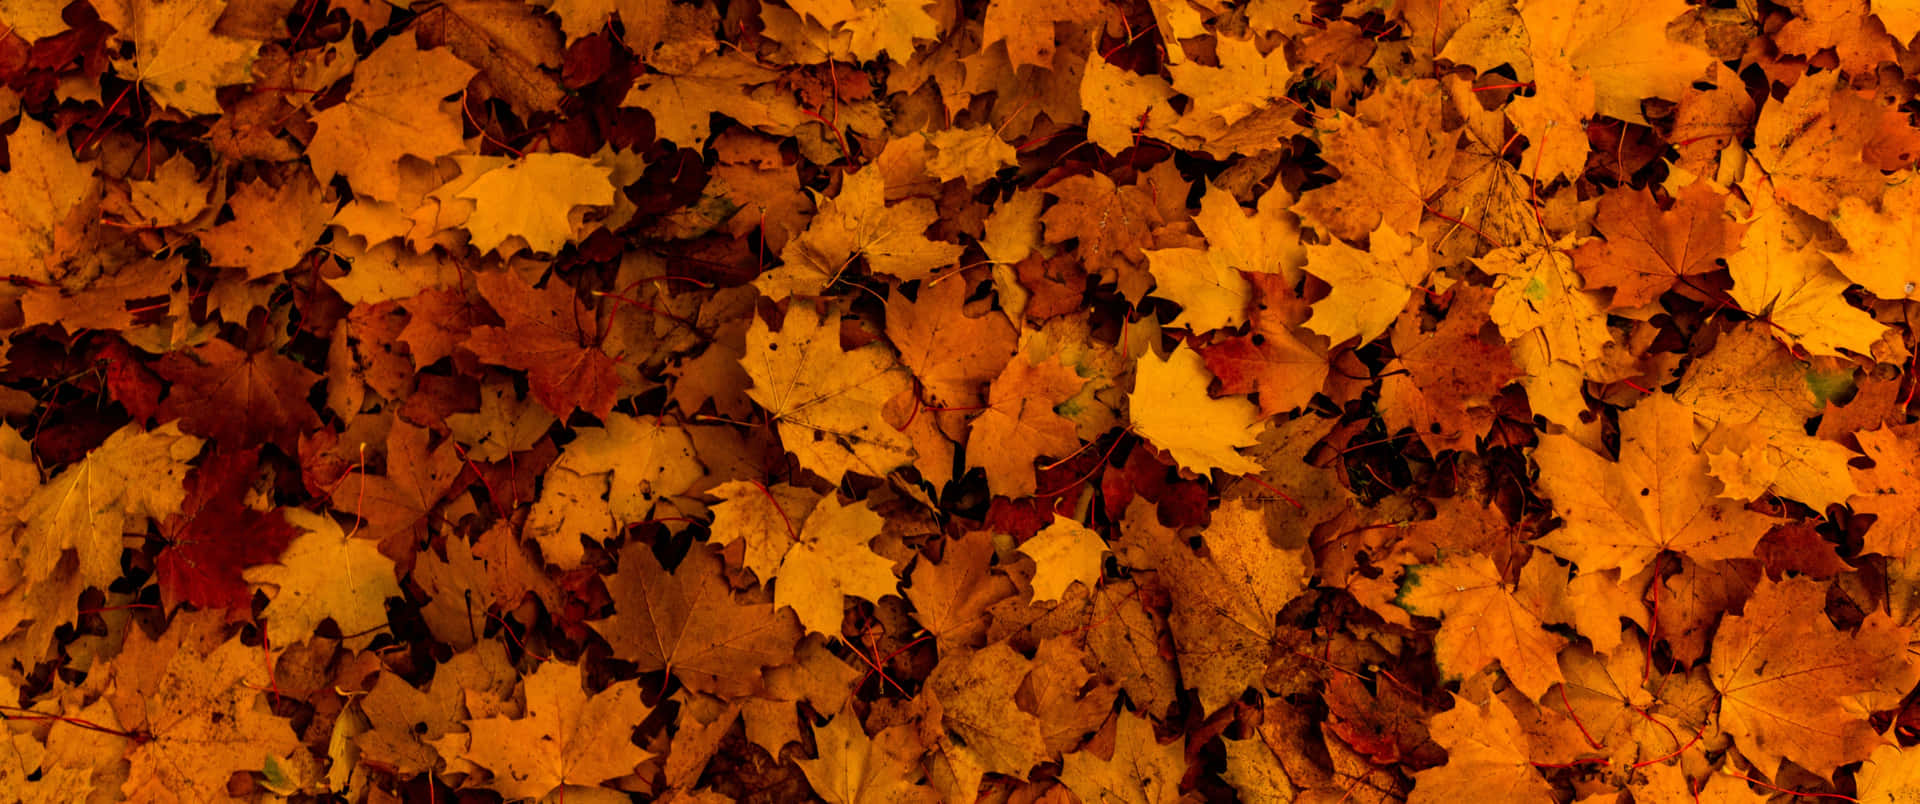 Enjoy the beauty of the season with the sun setting over the golden-brown leaves of fall. Wallpaper